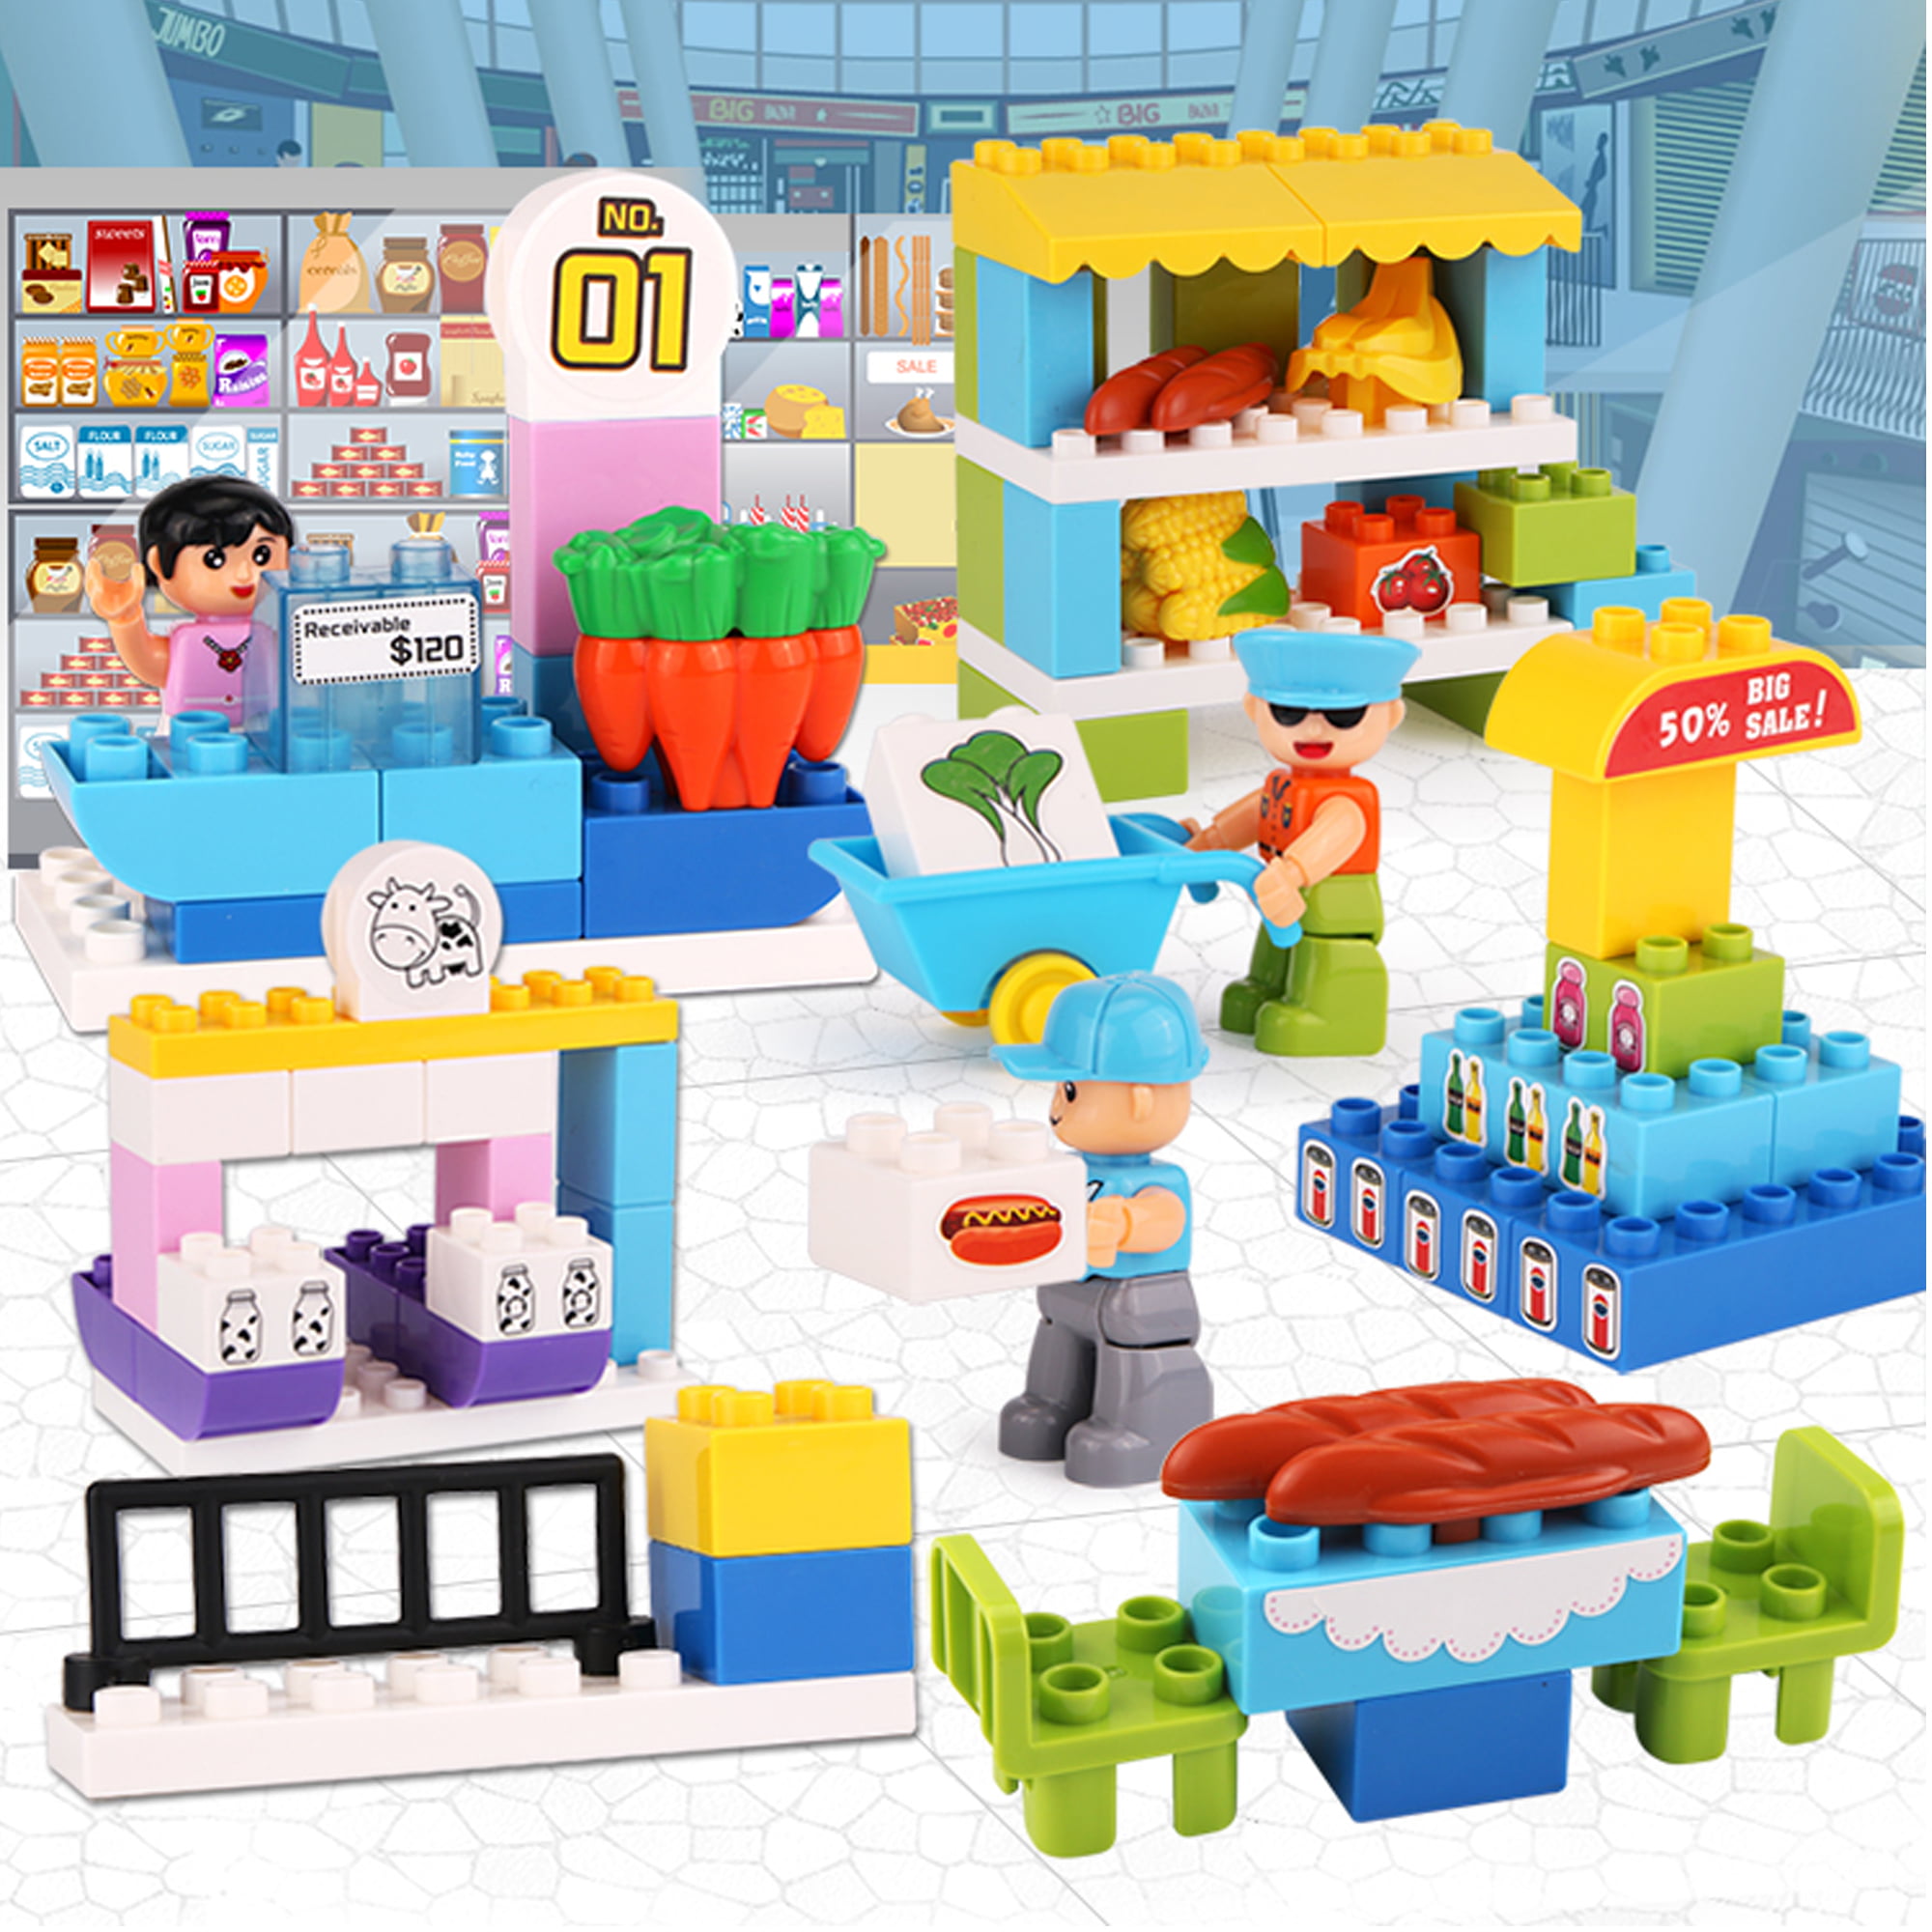 Fun & Educational Kids Interlocking Story Block Building Set from ELE TOYS 74 Pieces Joey Visits the Airport 